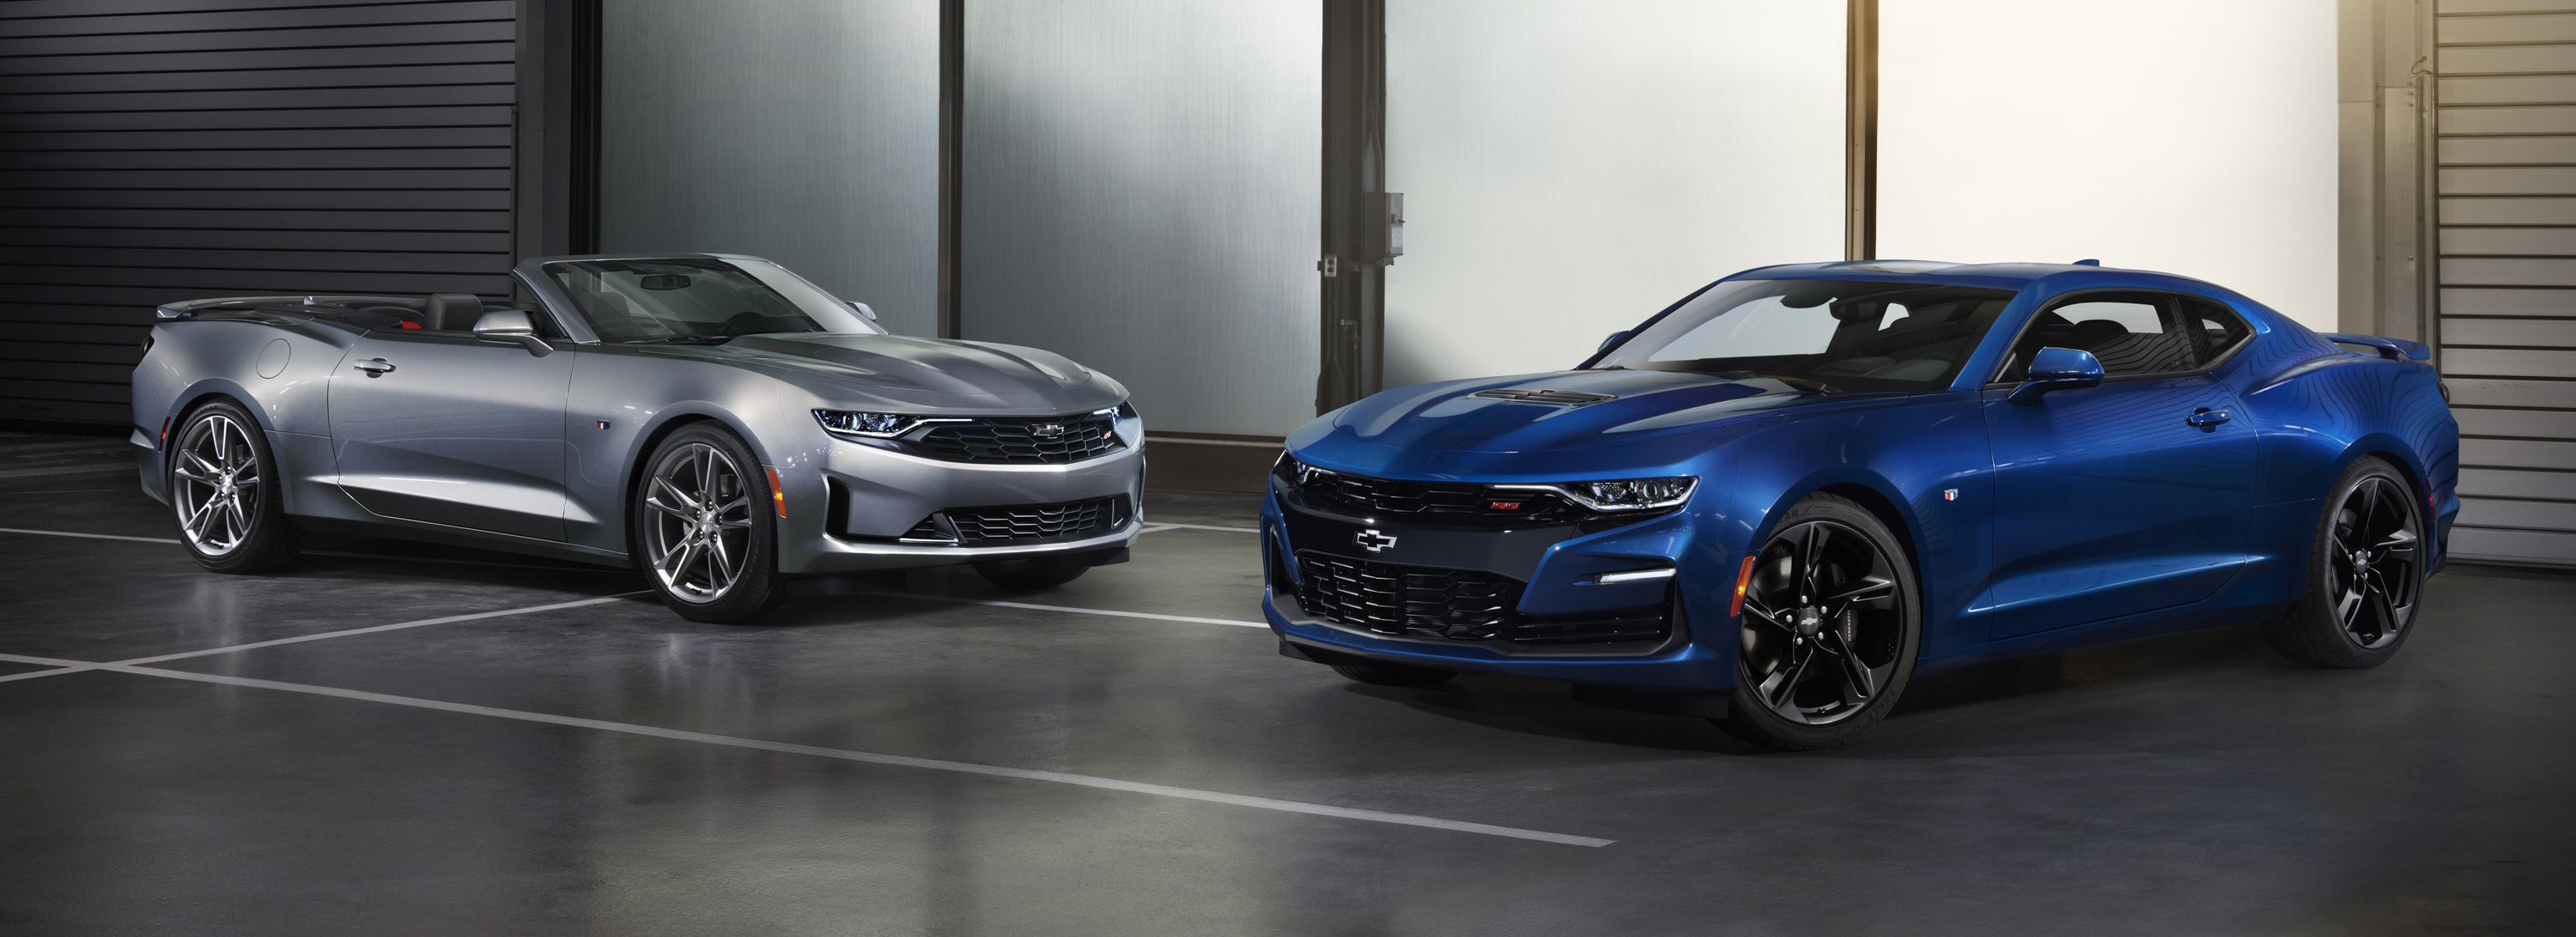 2019 Chevrolet Camaro SS Coupe and Camaro RS Convertible Wallpapers #134 of 148